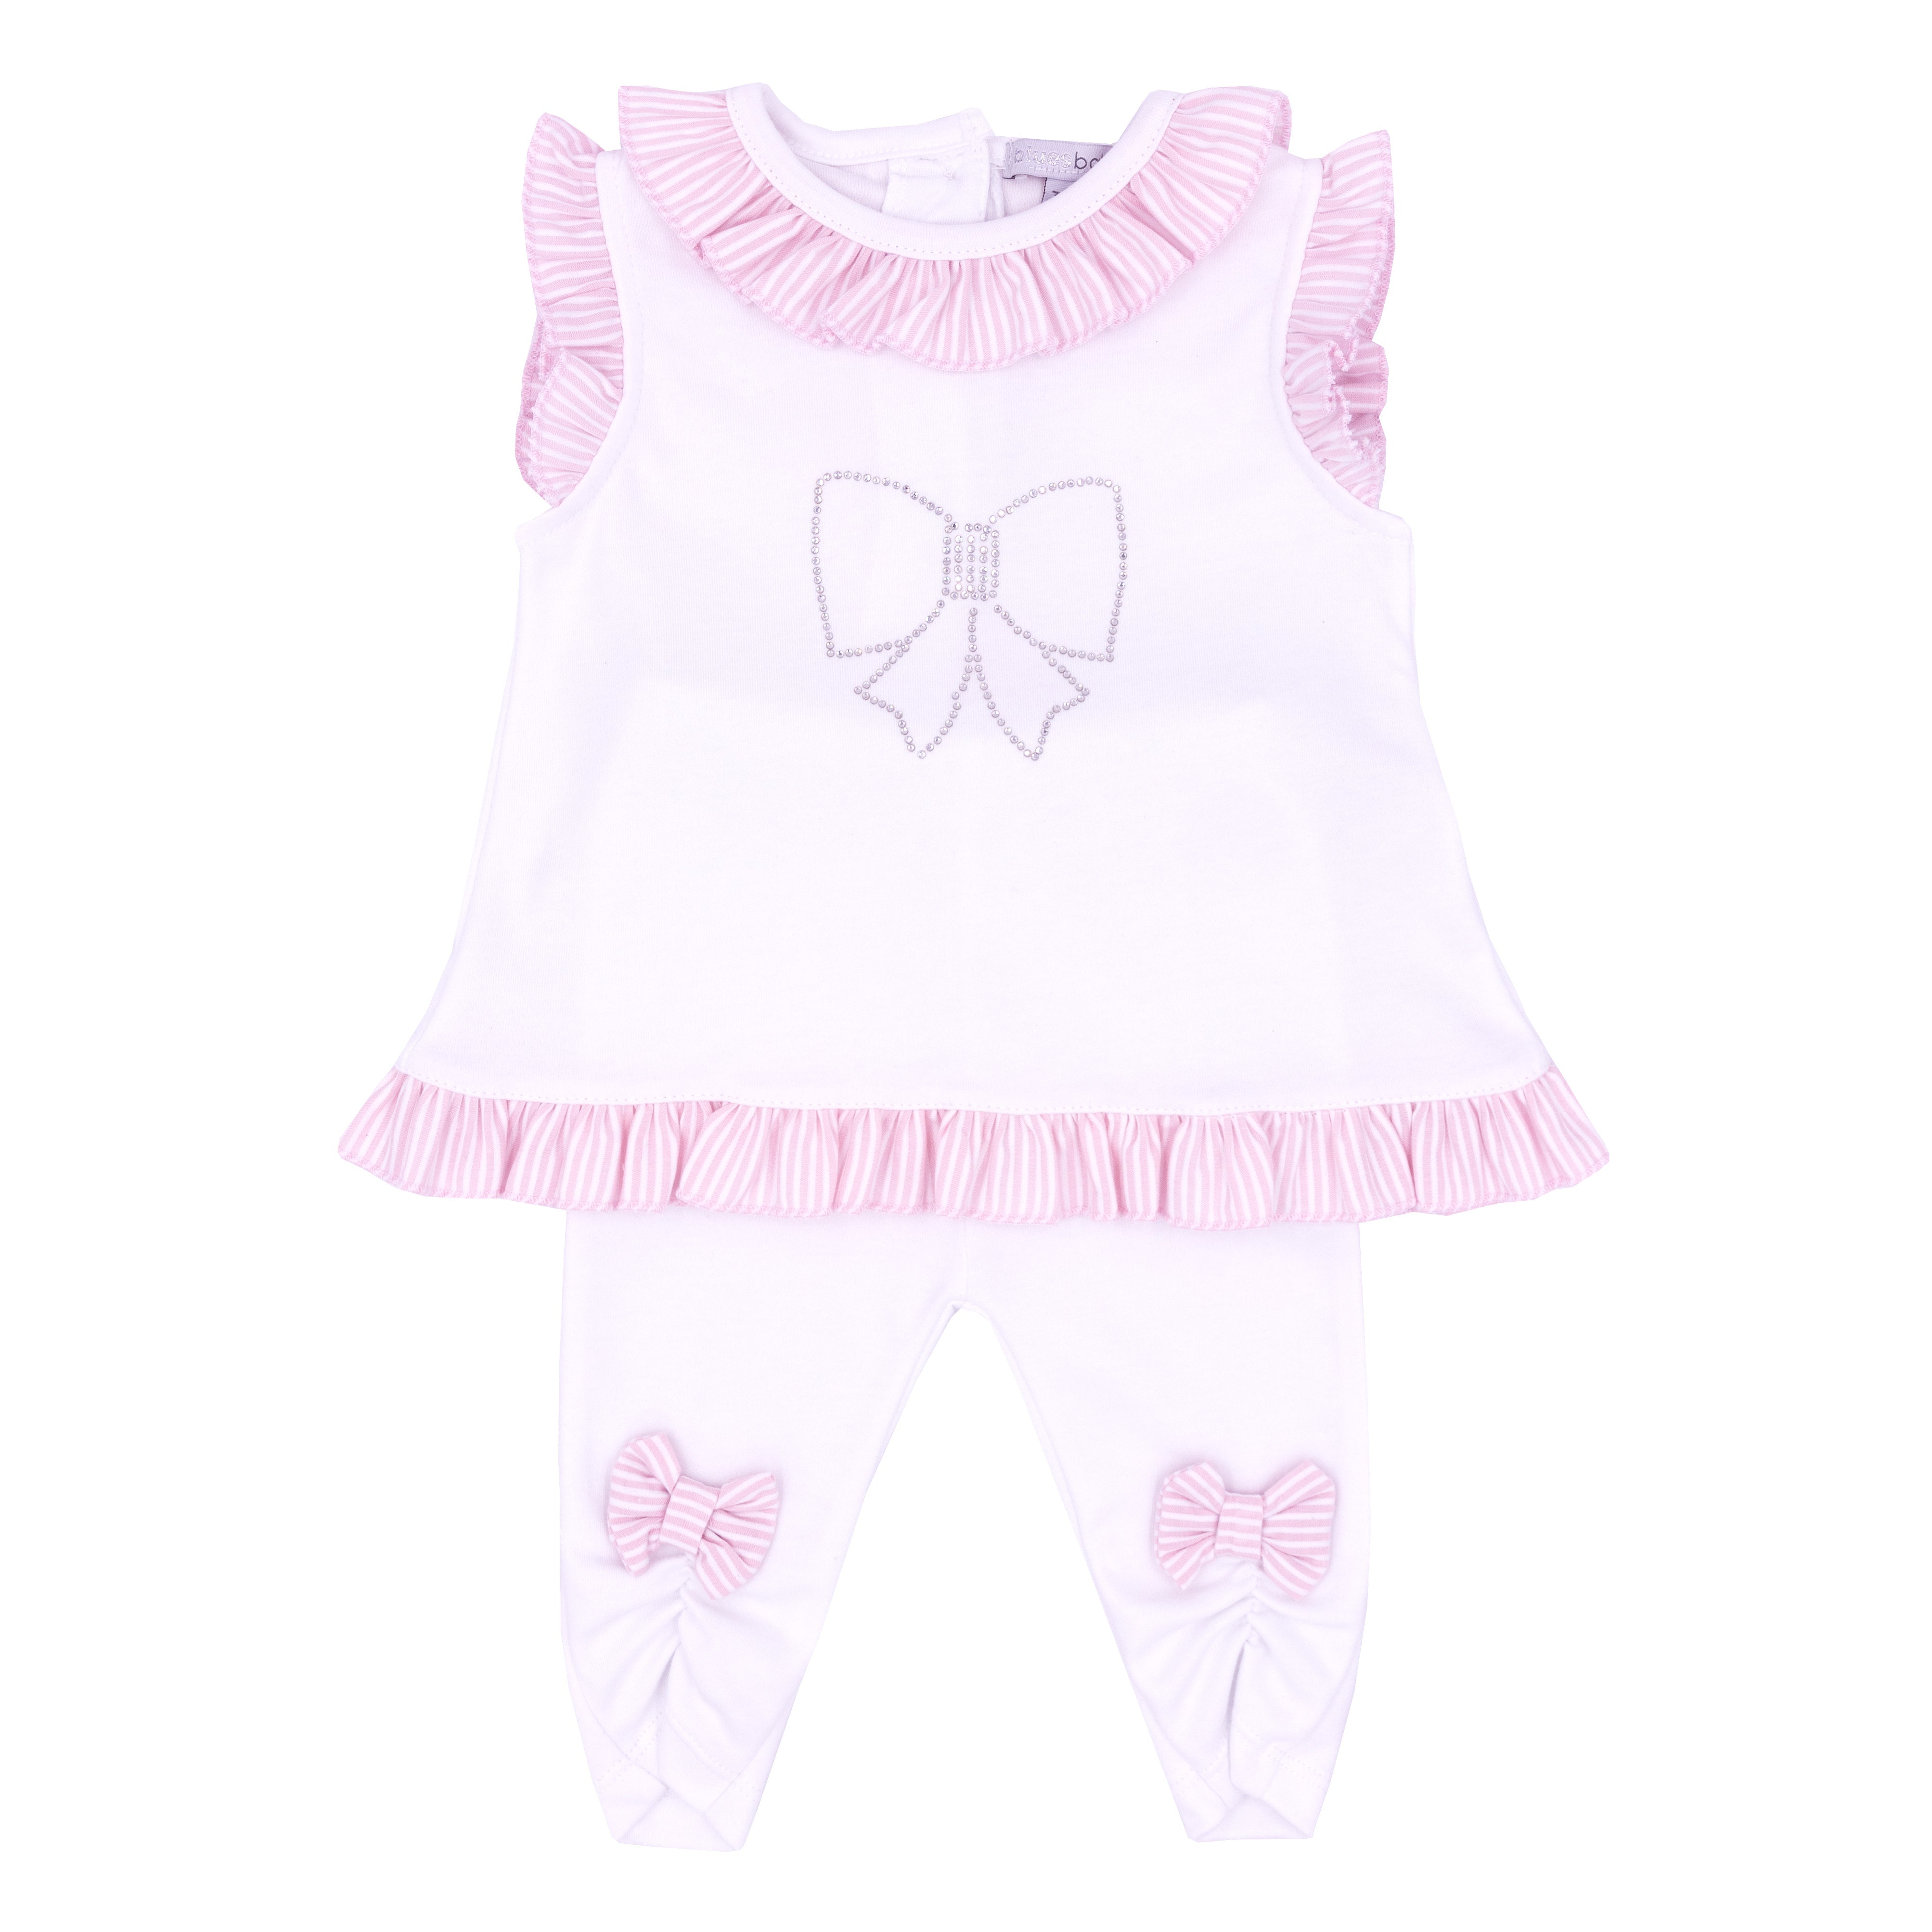 Girls tunic and legging set with frill and diamante applique